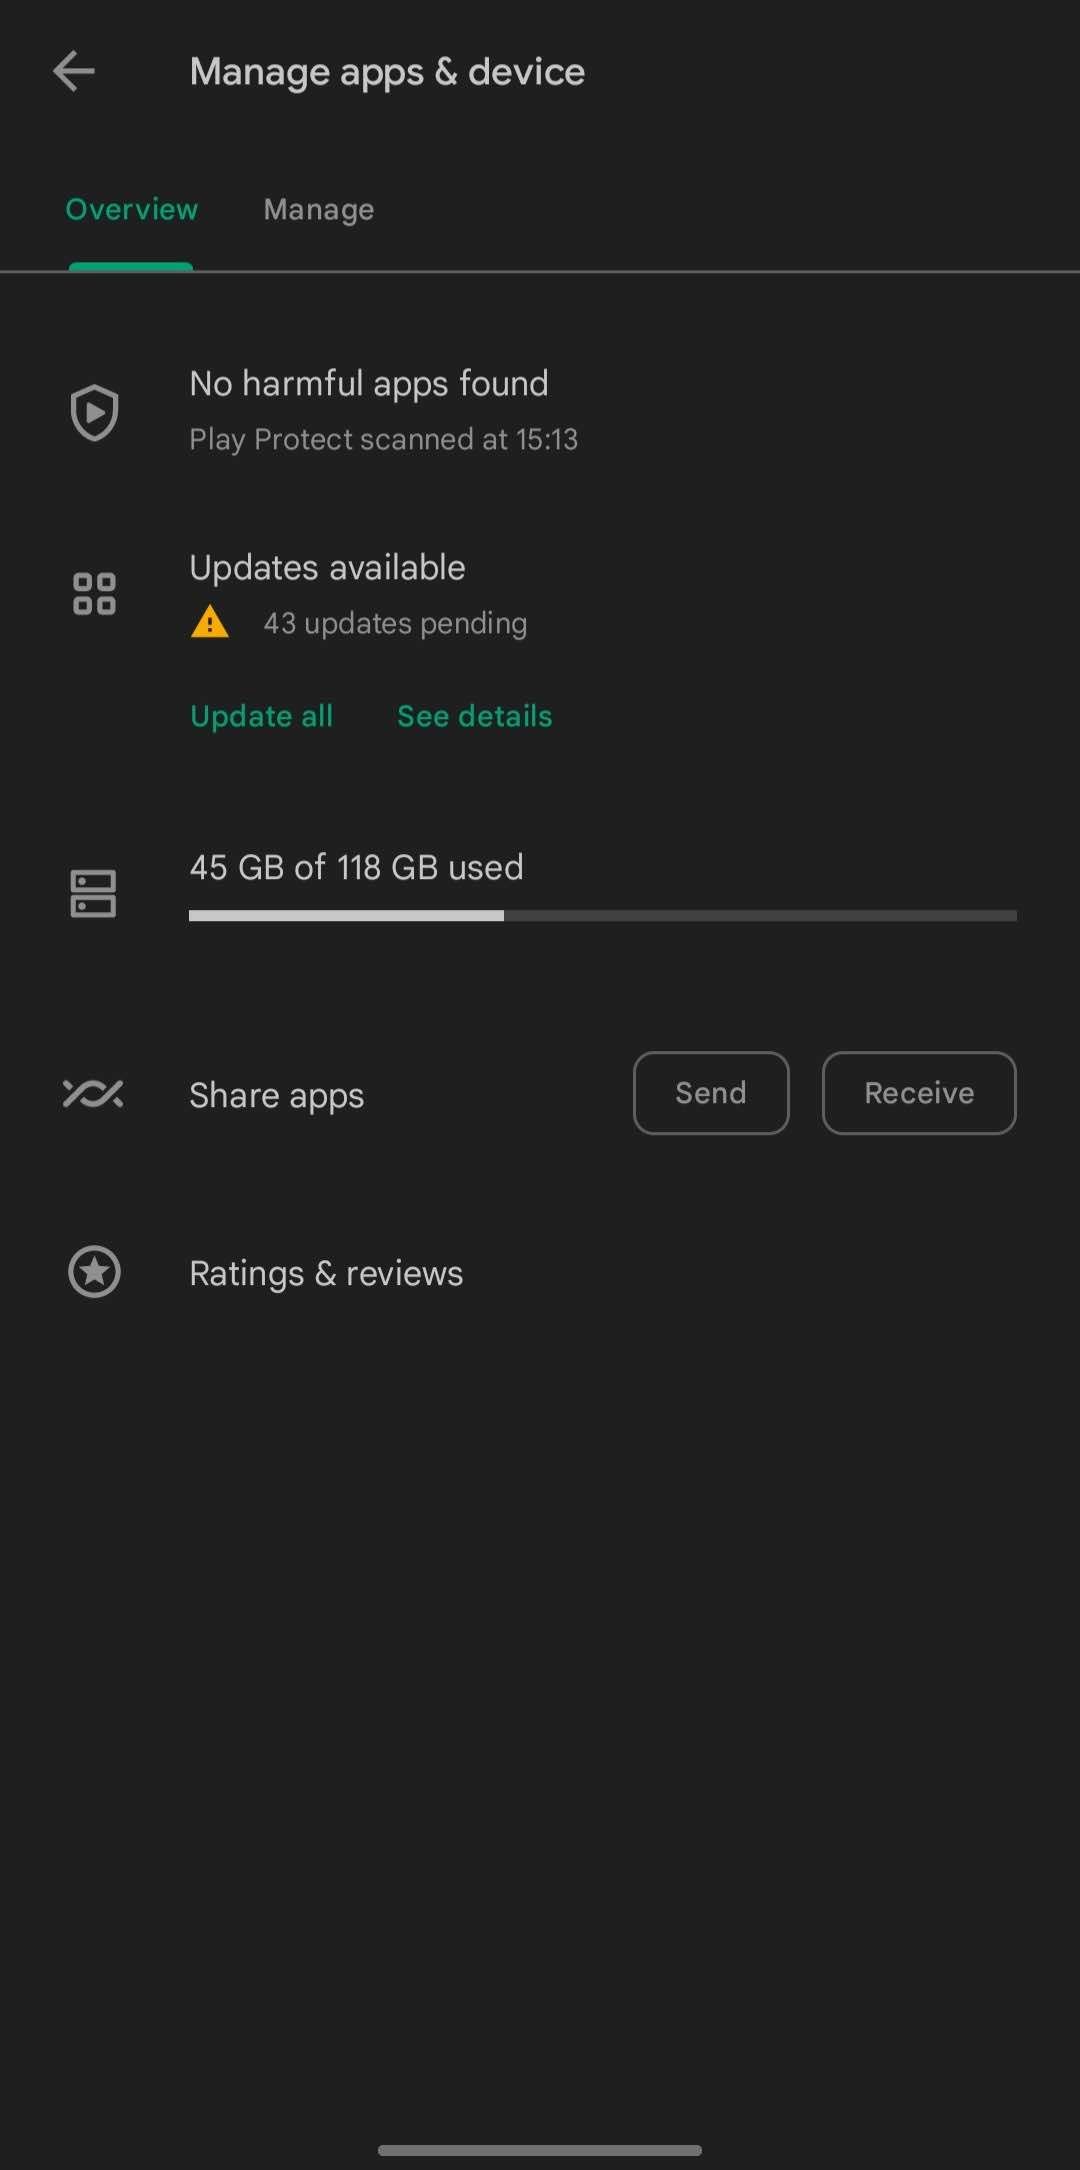 Google Play Store screenshot showing pending updates for applications